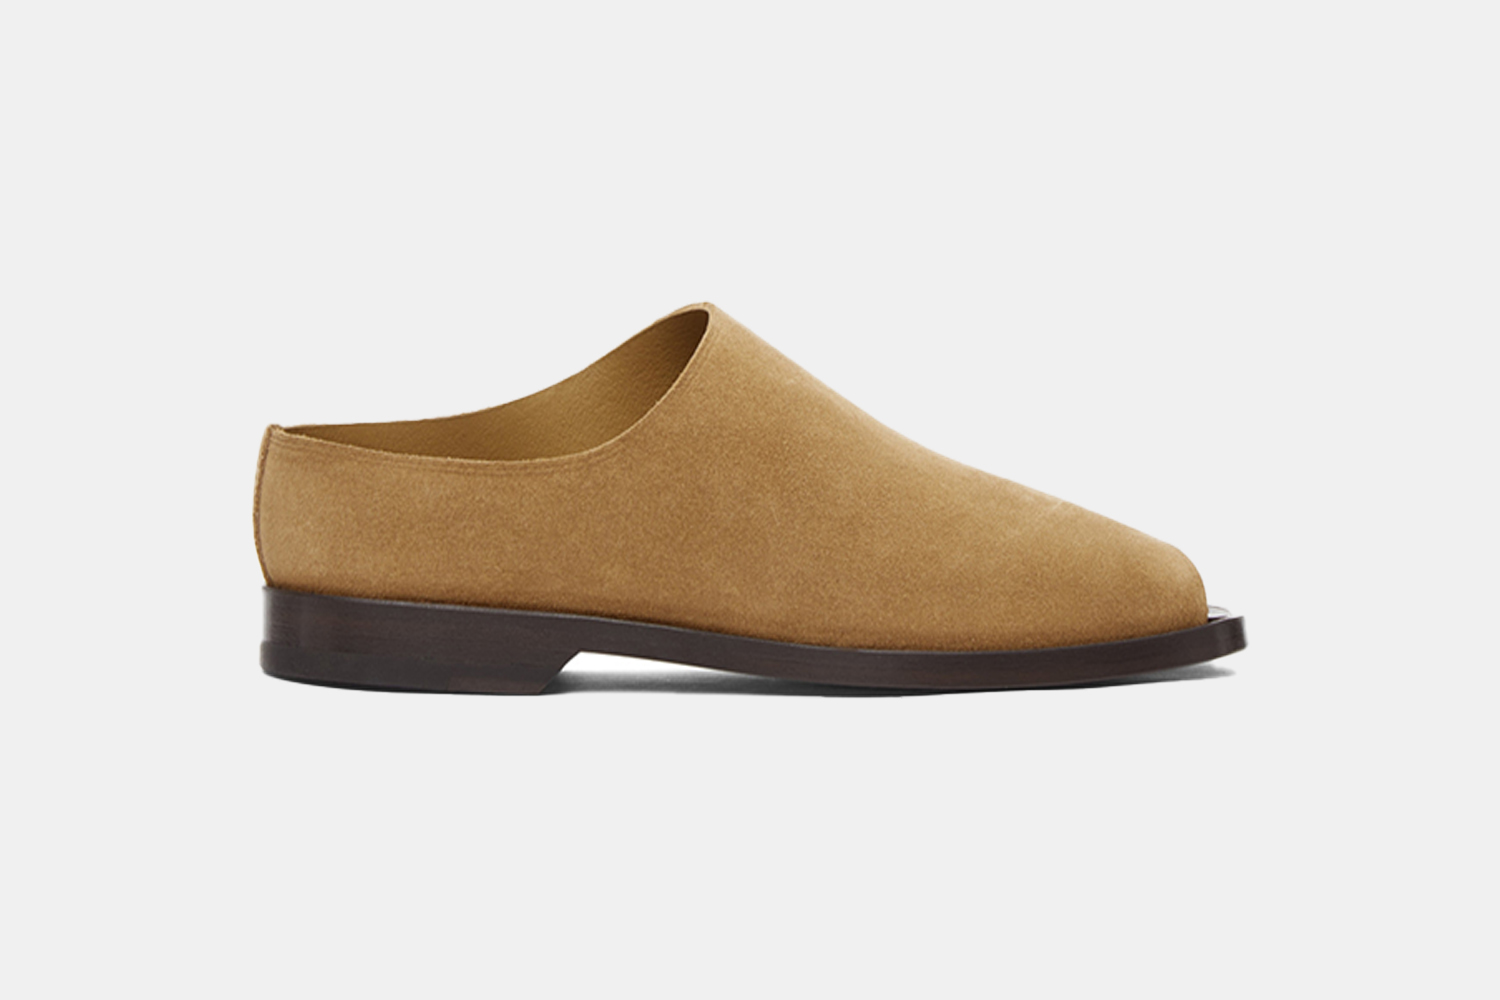 a pair of tan lemaire mules with an open toe